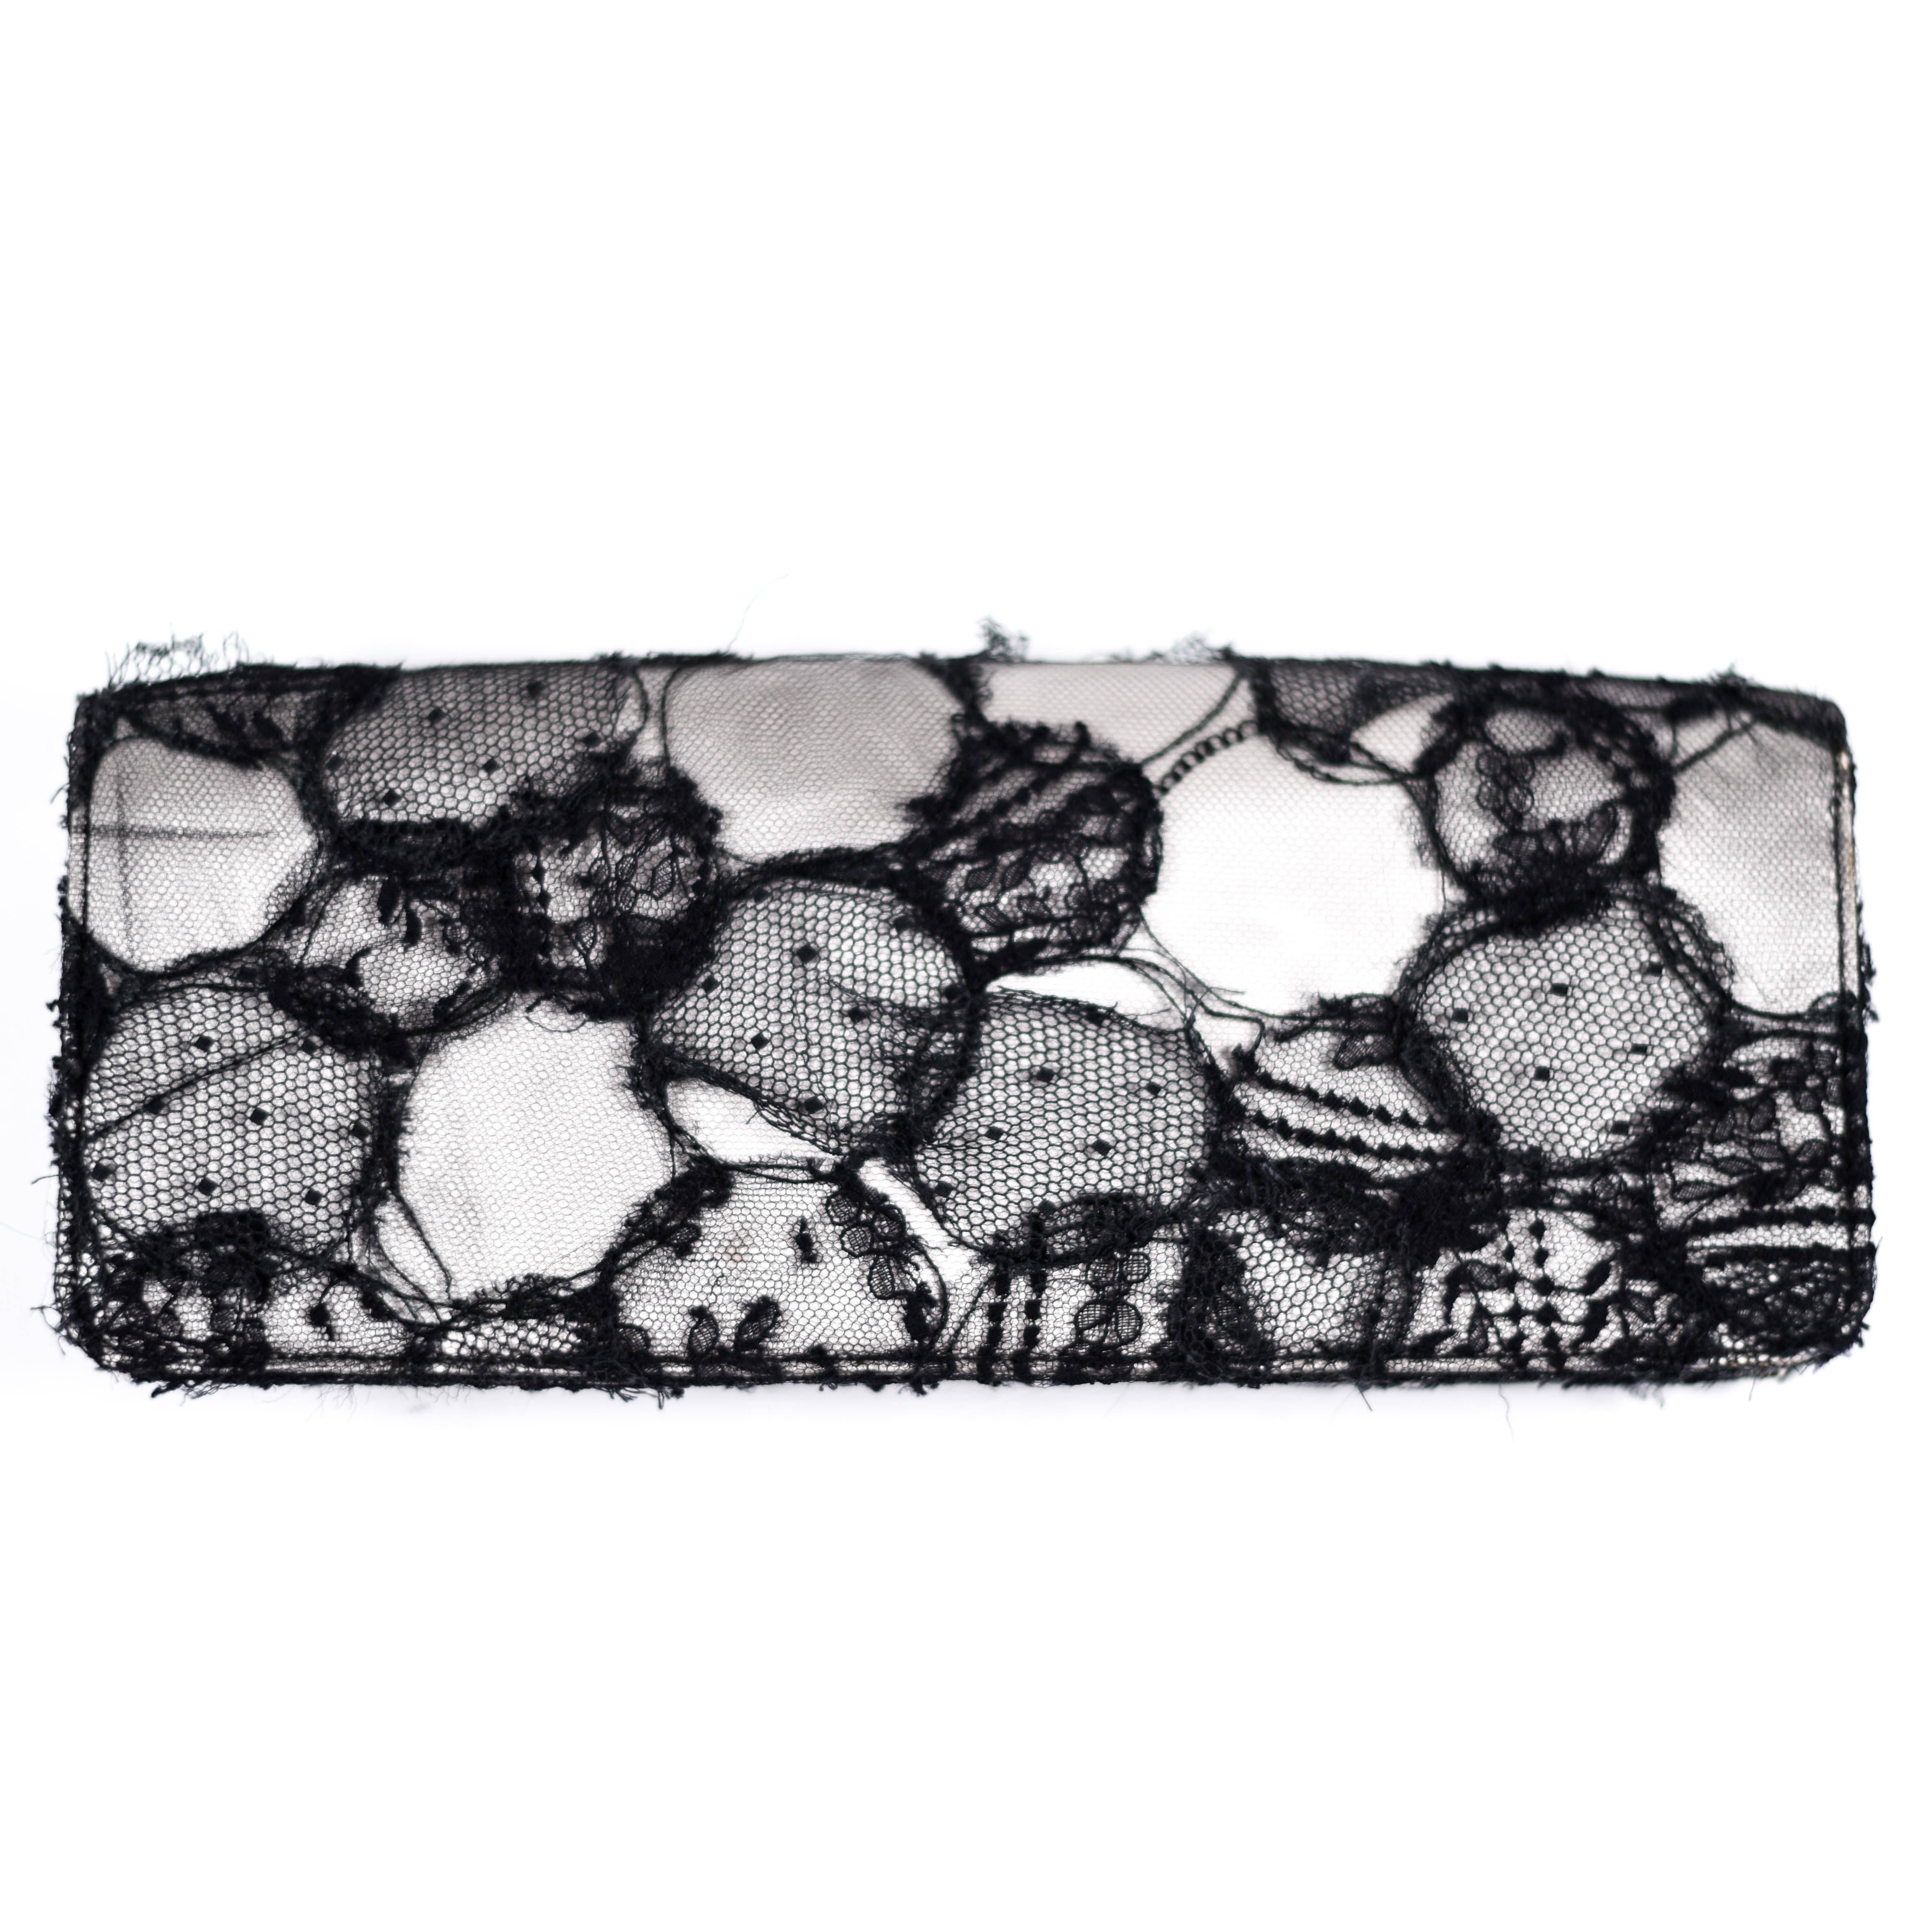 Chanel - Lace Clutch with Bow & CC Crystal Logo

Color:  Black / off-White-Cream 

Material: Satin , Fabric, Lace

------------------------------------------------------------
Details:

- bow detail at front

- CC logo at bow with black